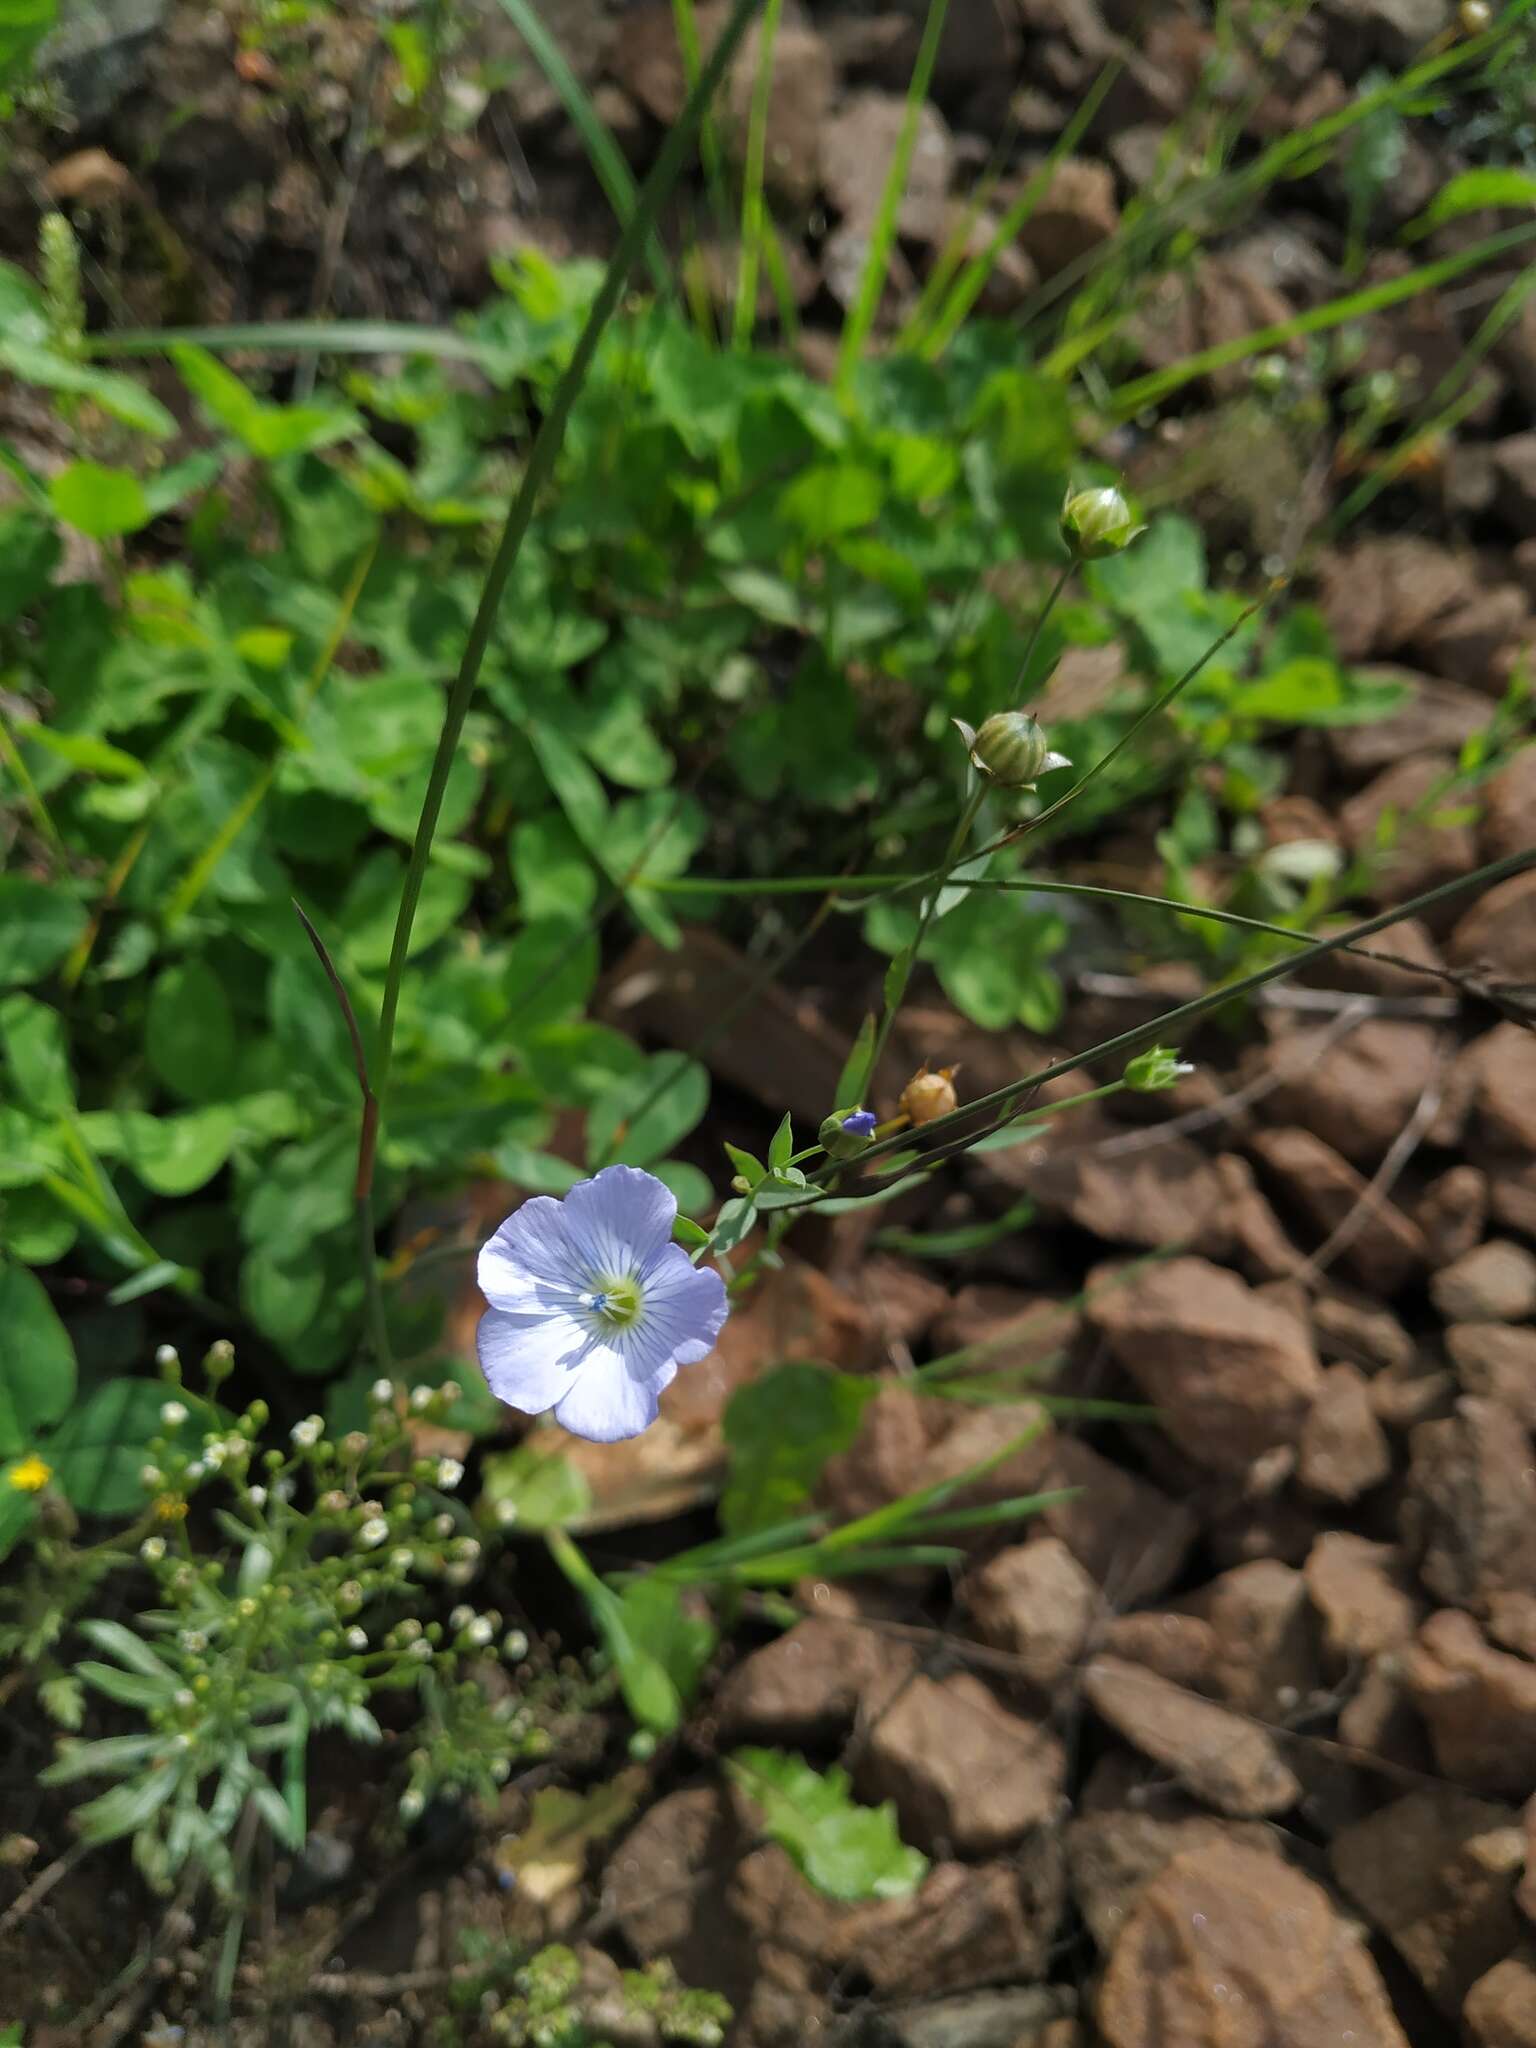 Image of common flax